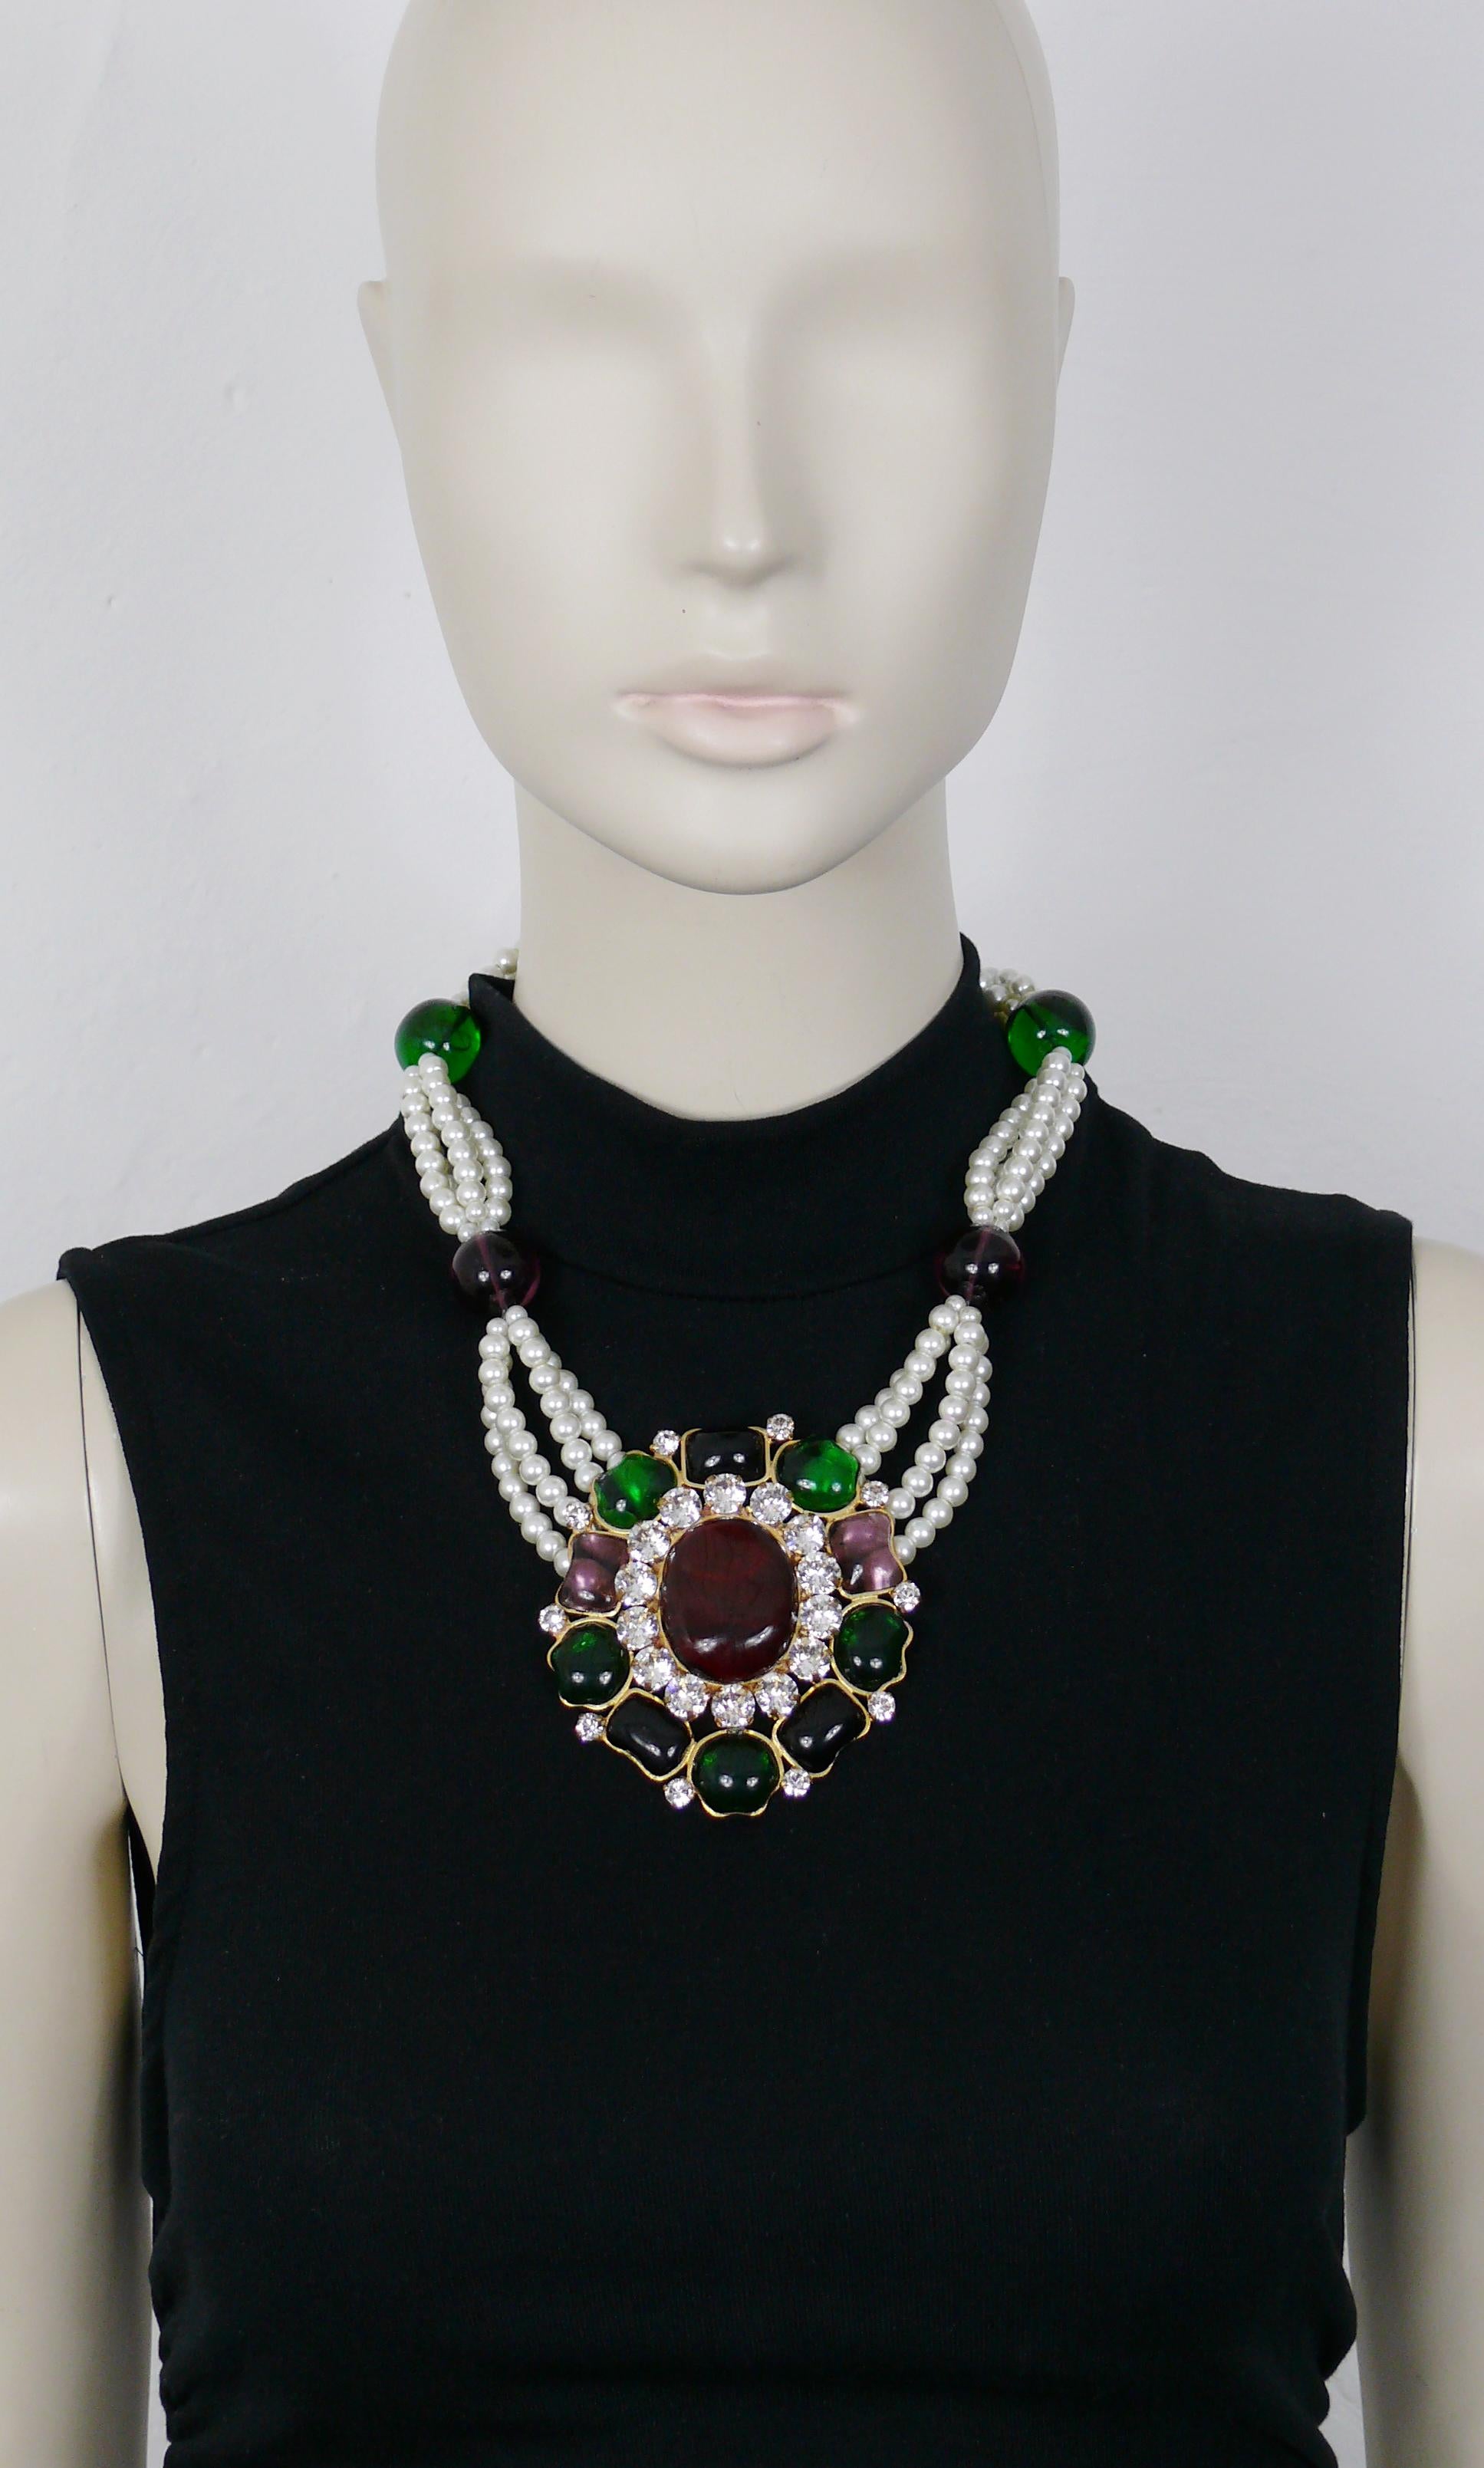 CHANEL vintage faux pearl, green and purple glass bead necklace featuring a stunning massive stylized flower centerpiece embellished with MAISON GRIPOIX multicolored (green, light purple, purple and red) poured glass cabochons and clear